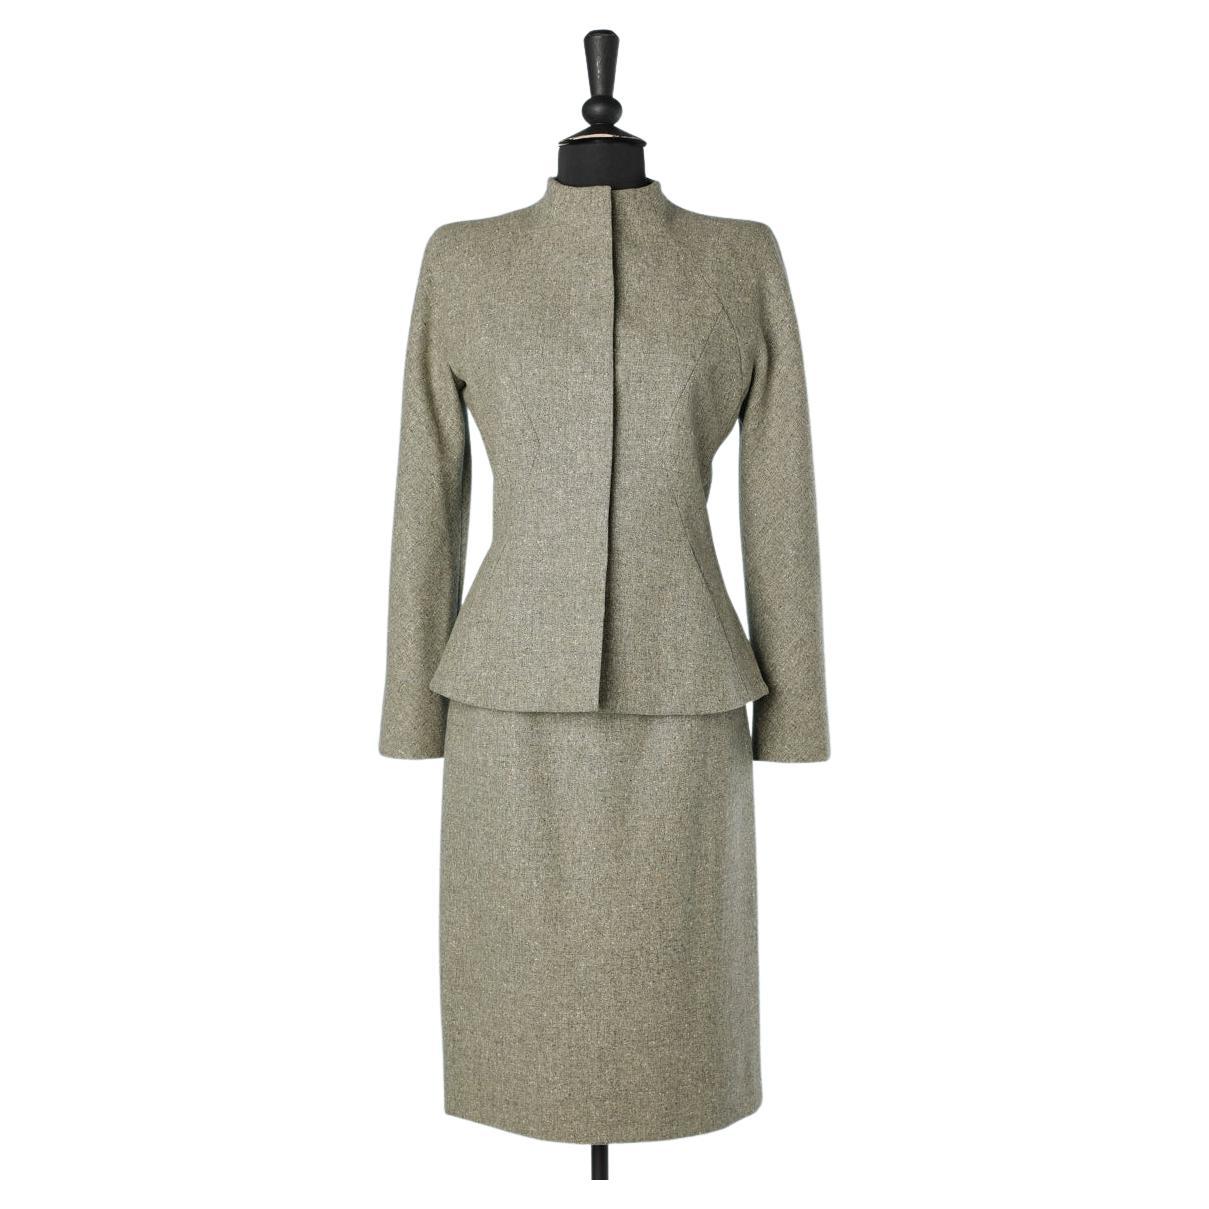 Grey tweed skirt suit with raglan sleeves Givenchy Couture Numbered 